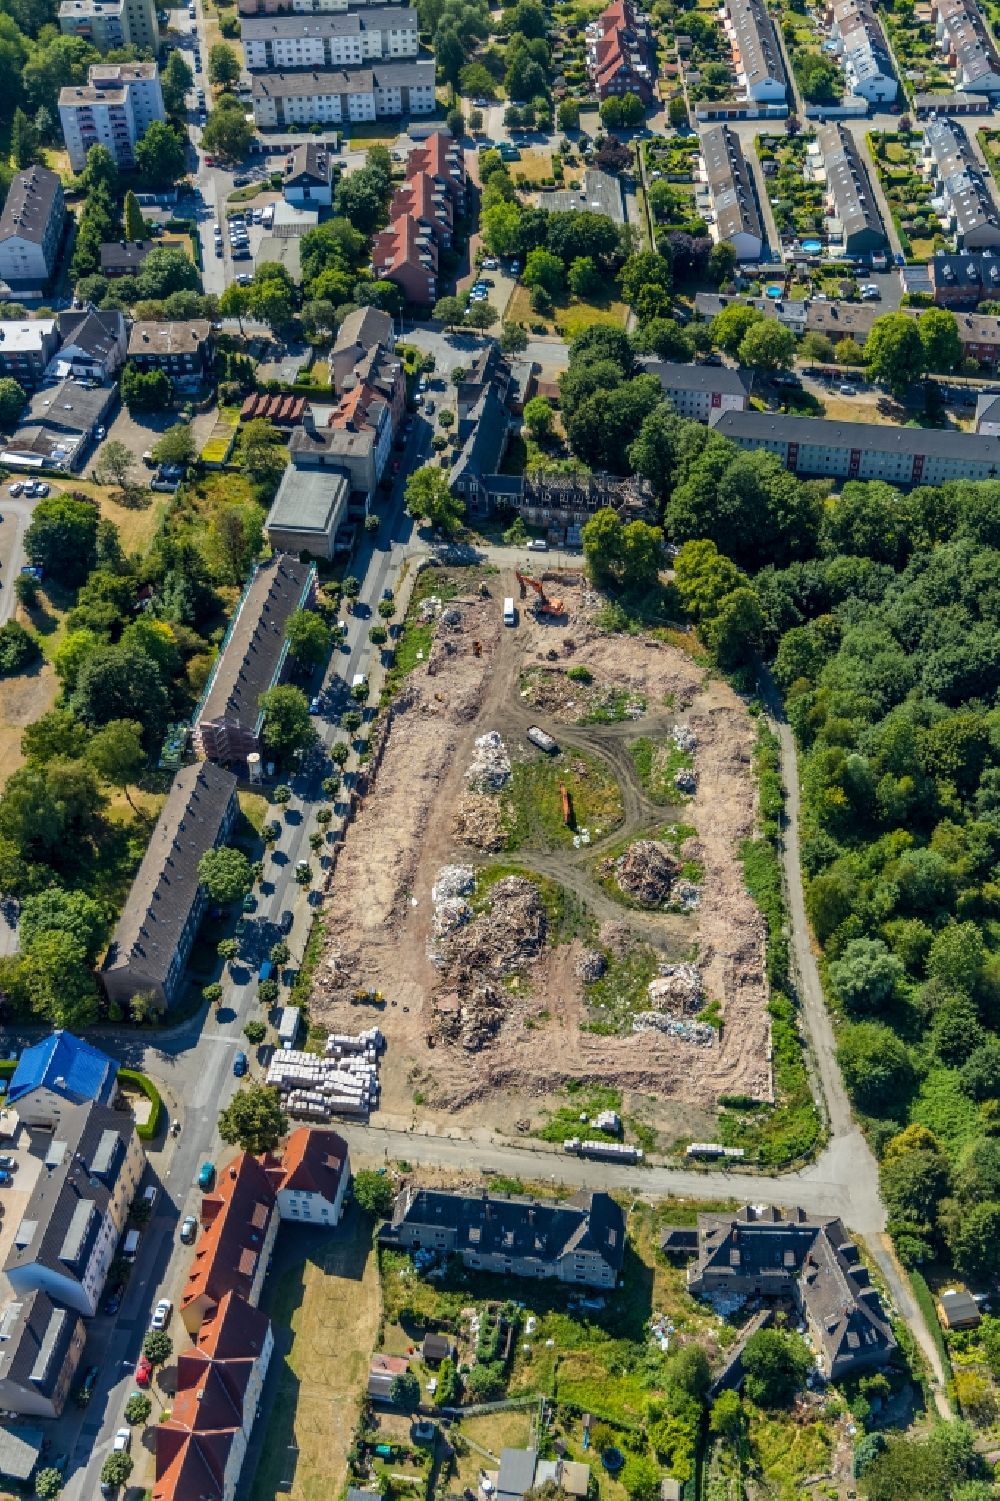 Aerial image Gladbeck - Demolition and disposal work on the remains of the ruins of the former colliery settlement Schlaegel & Eisen of the Gladbecker colliery Zweckel between of Schlaegelstrasse, Eisenstrasse and Bohnekampstrasse in Gladbeck in the state North Rhine-Westphalia, Germany